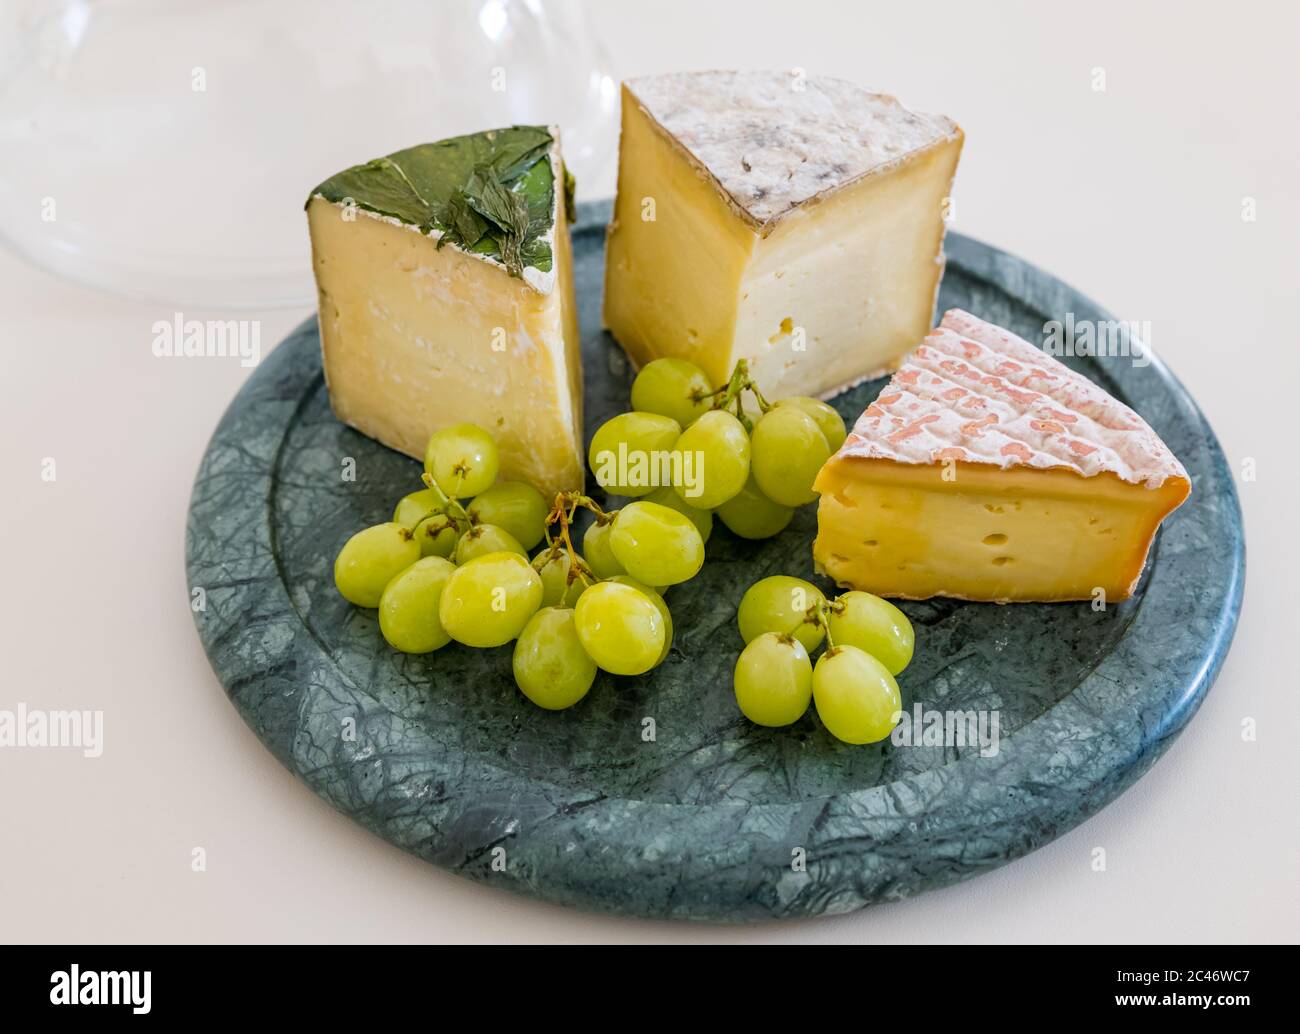 Cheeseboard with Garlic Yarg, Gorwydd Caerphilly and Irish Gubbeen cheeses with green grapes on white kitchen counter Stock Photo